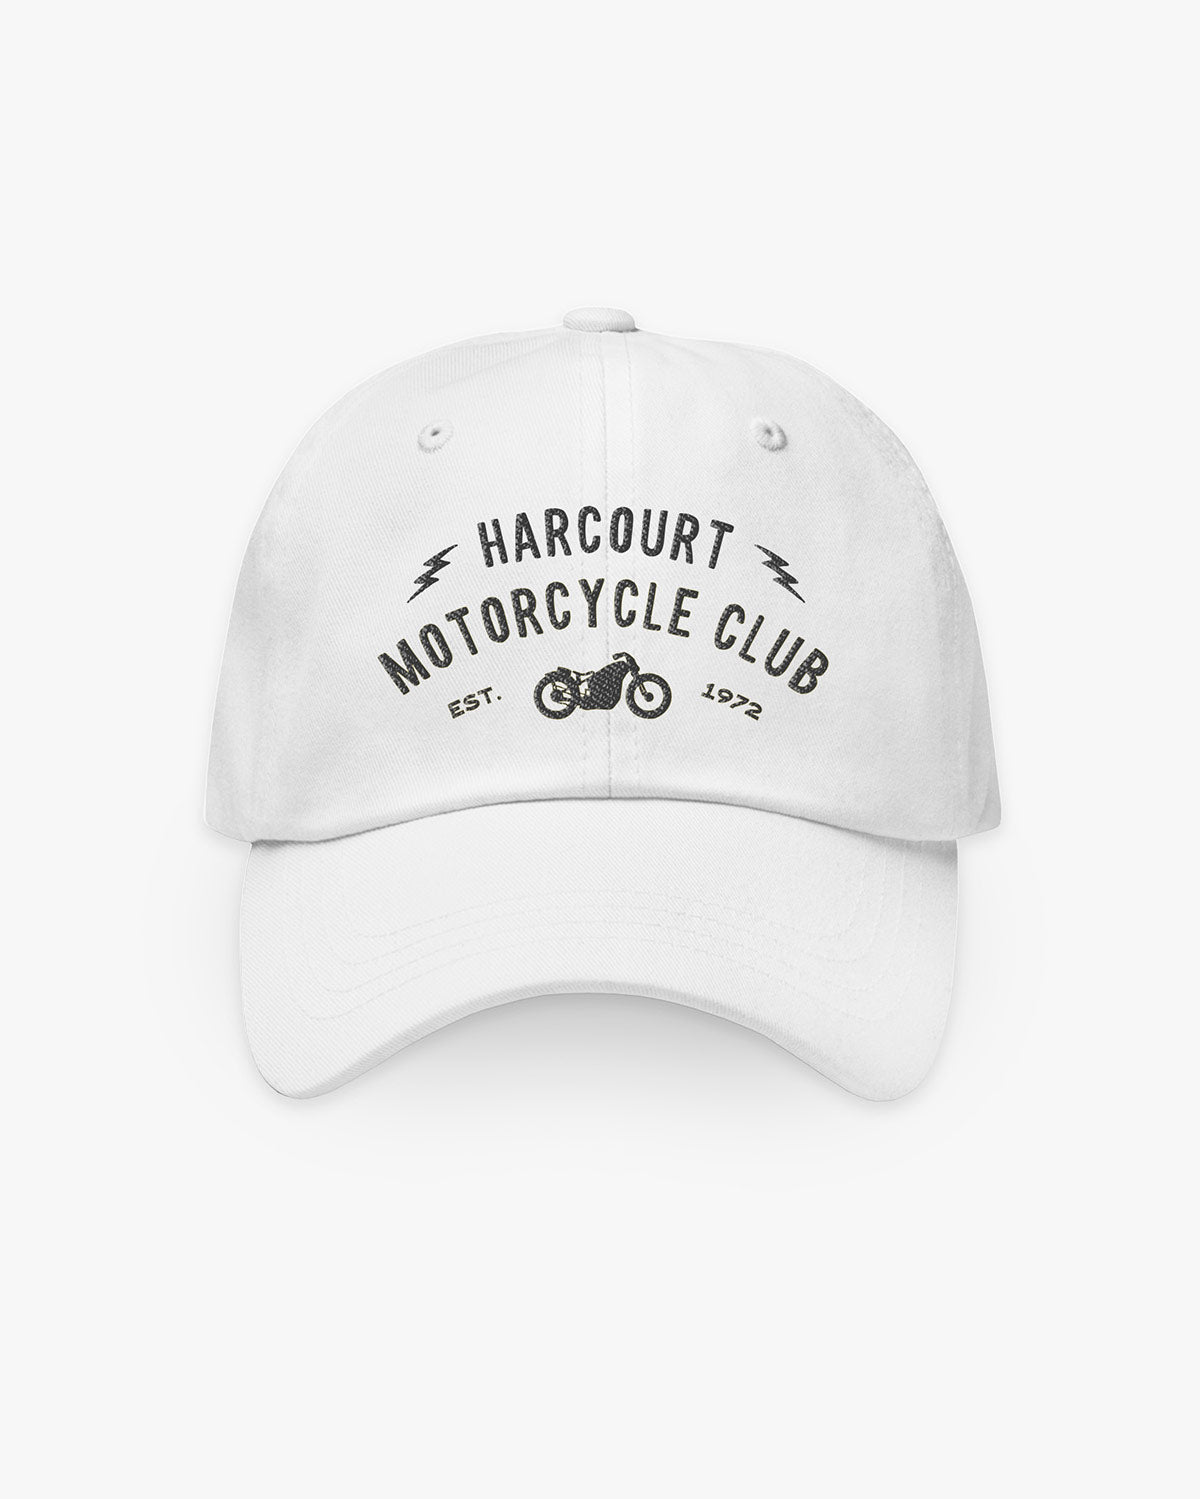 Motorcycle Club - Harcourt - Hat